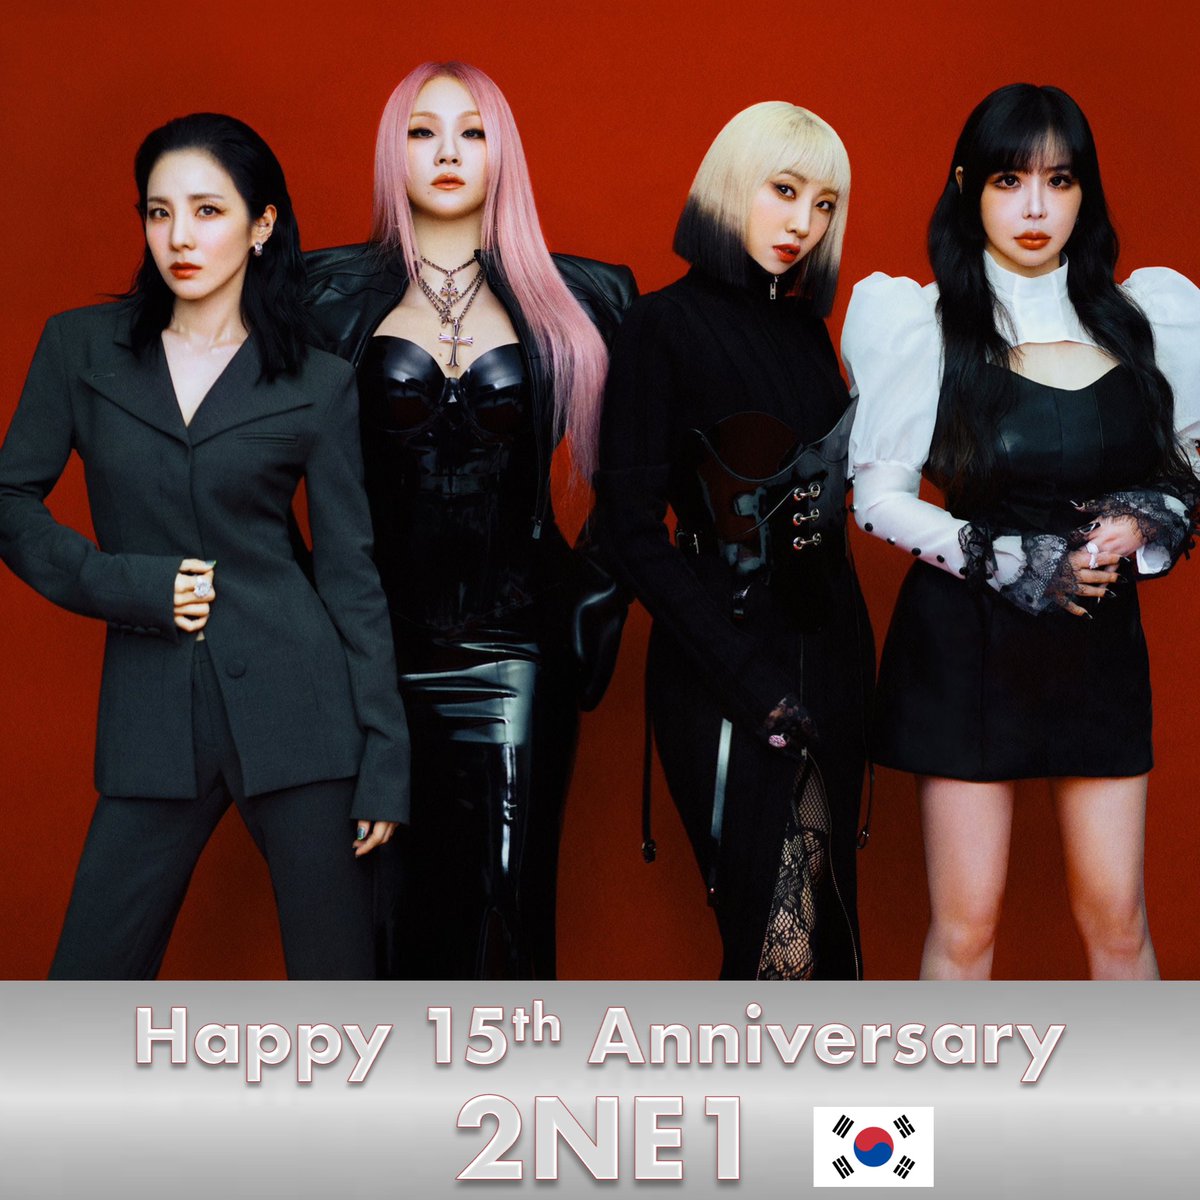 Happy 15th Anniversary to #2NE1! 👏🎂1⃣5⃣🎉🥳👑❤️‍🔥
#Bom, #CL, #Dara, and #Minzy have reunited to celebrate their 15th anniversary! They are one of the leading groups of the Korean wave, paving the way for others, and are famous for expanding girl group styles in the Korean music